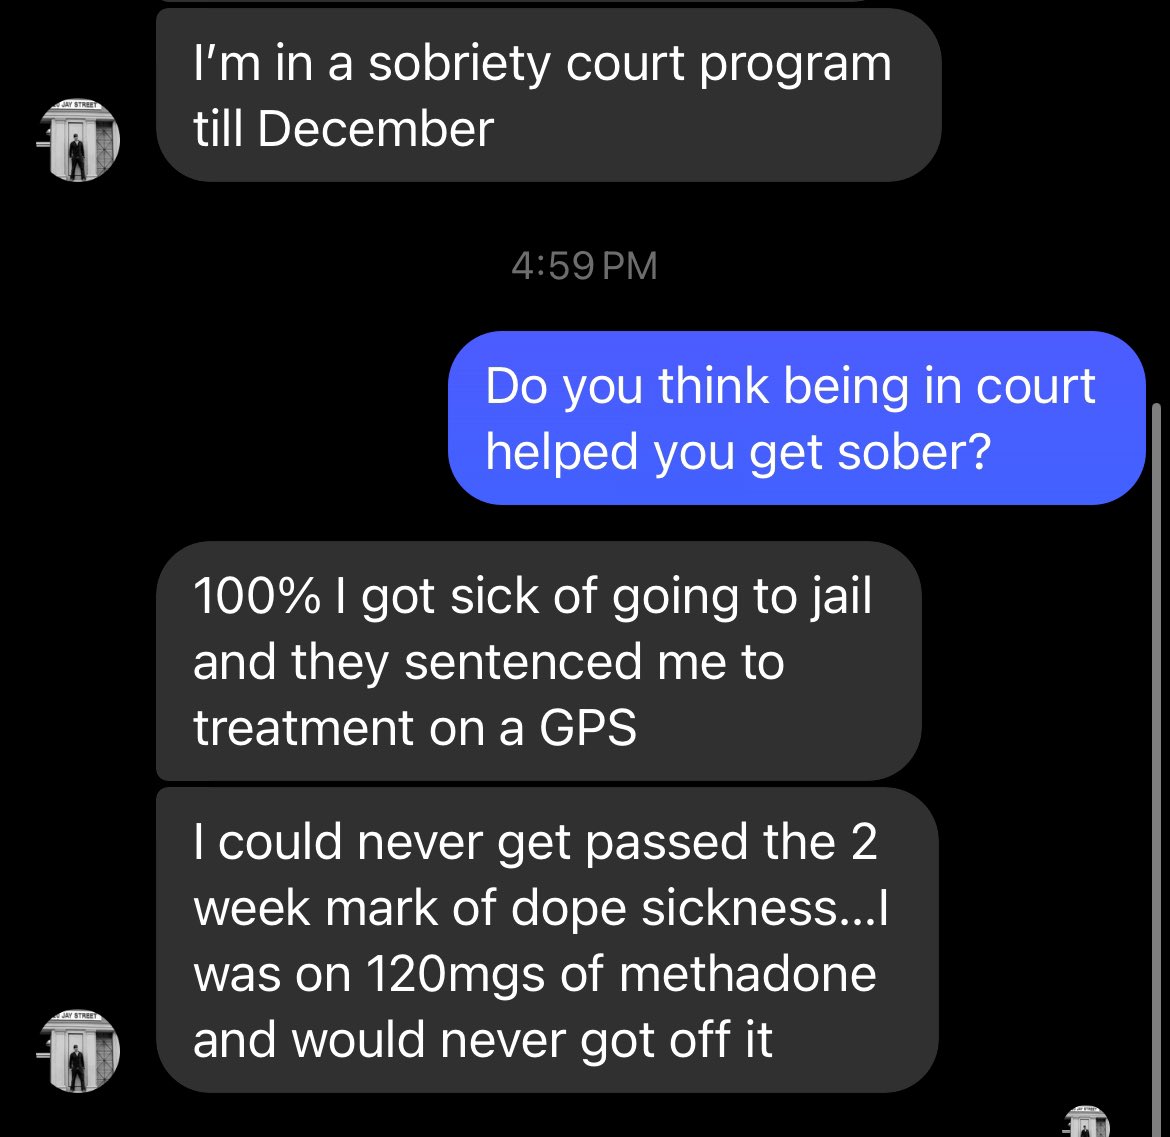 My old Skid Row buddy finally got a year sober. He’s thriving. Has a good job, back with his family, and getting his life back together. I wonder what finally helped him?